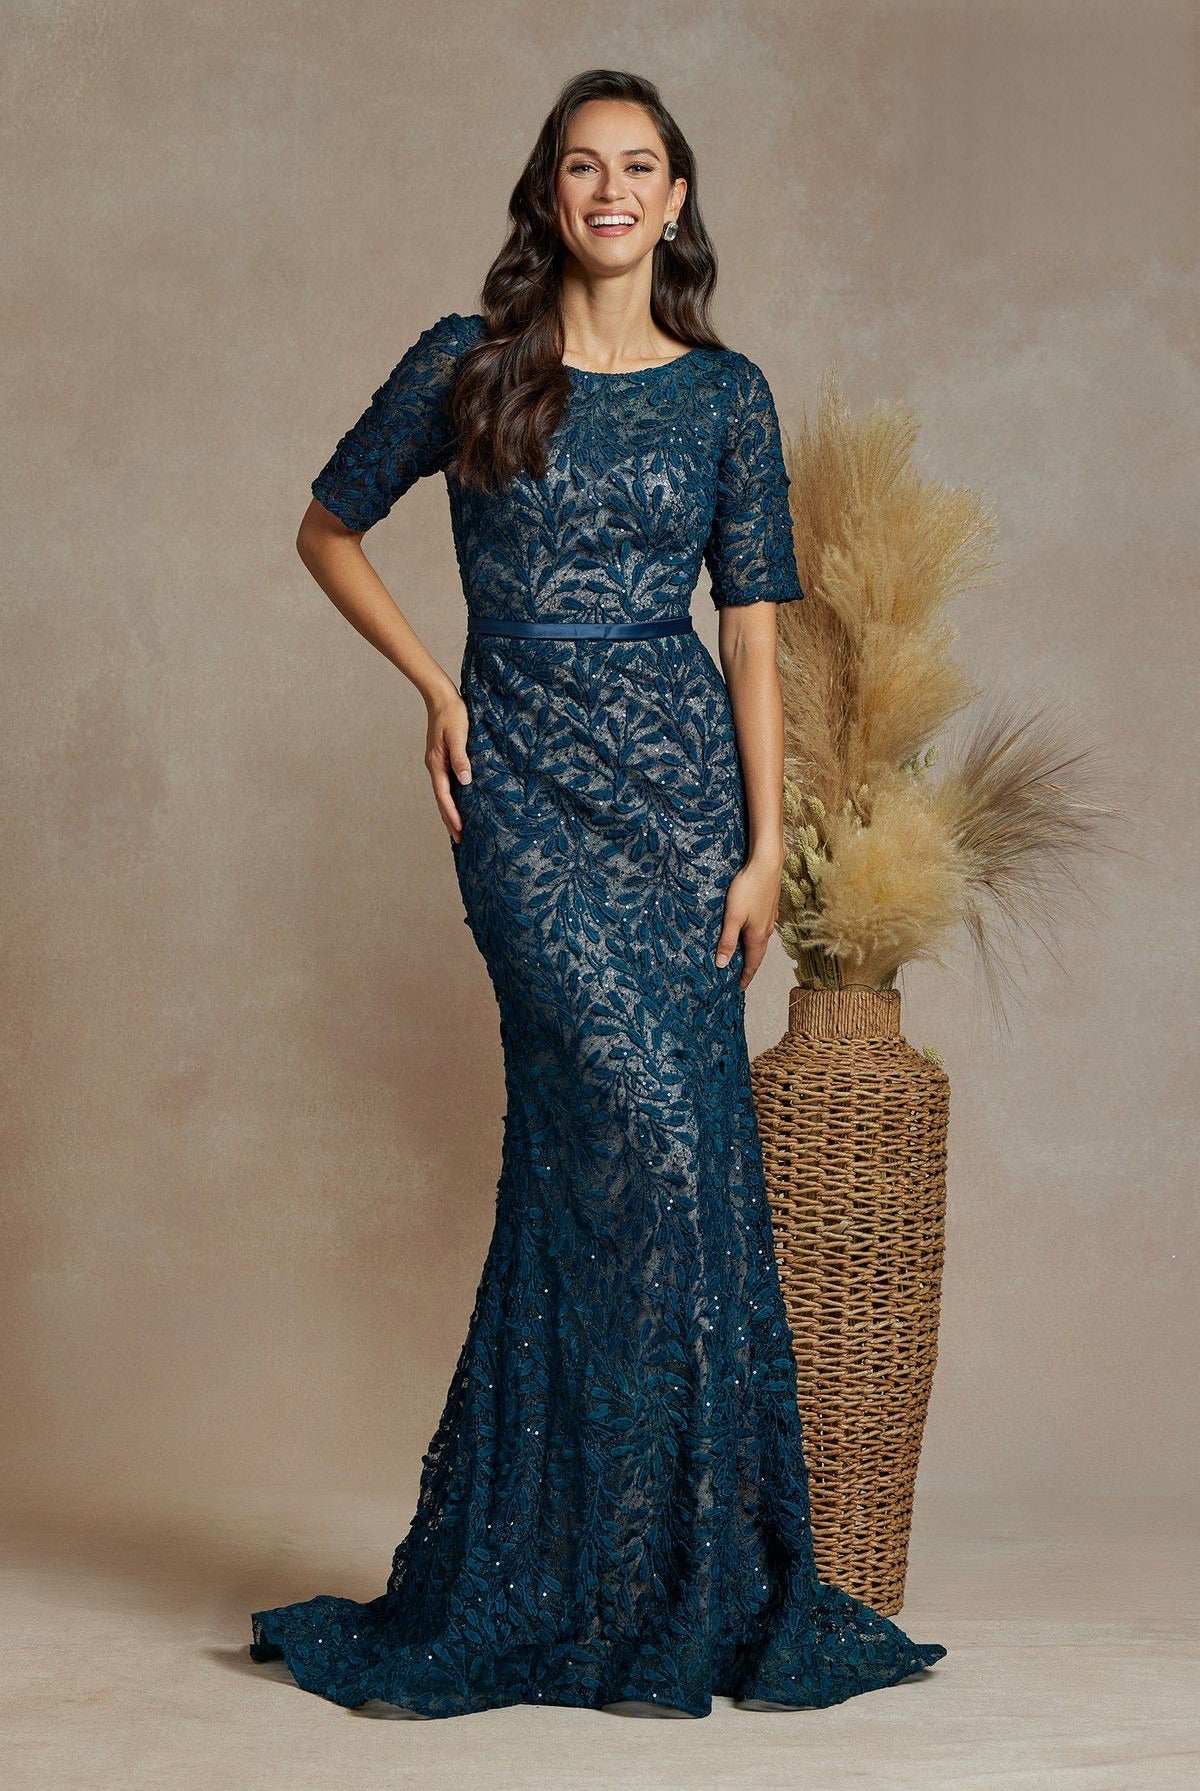 1/2 Sleeves Mermaid Embroidered Lace Long Mother of the Bride Dress NXJQ506-Mother of the Bride Dress-smcfashion.com